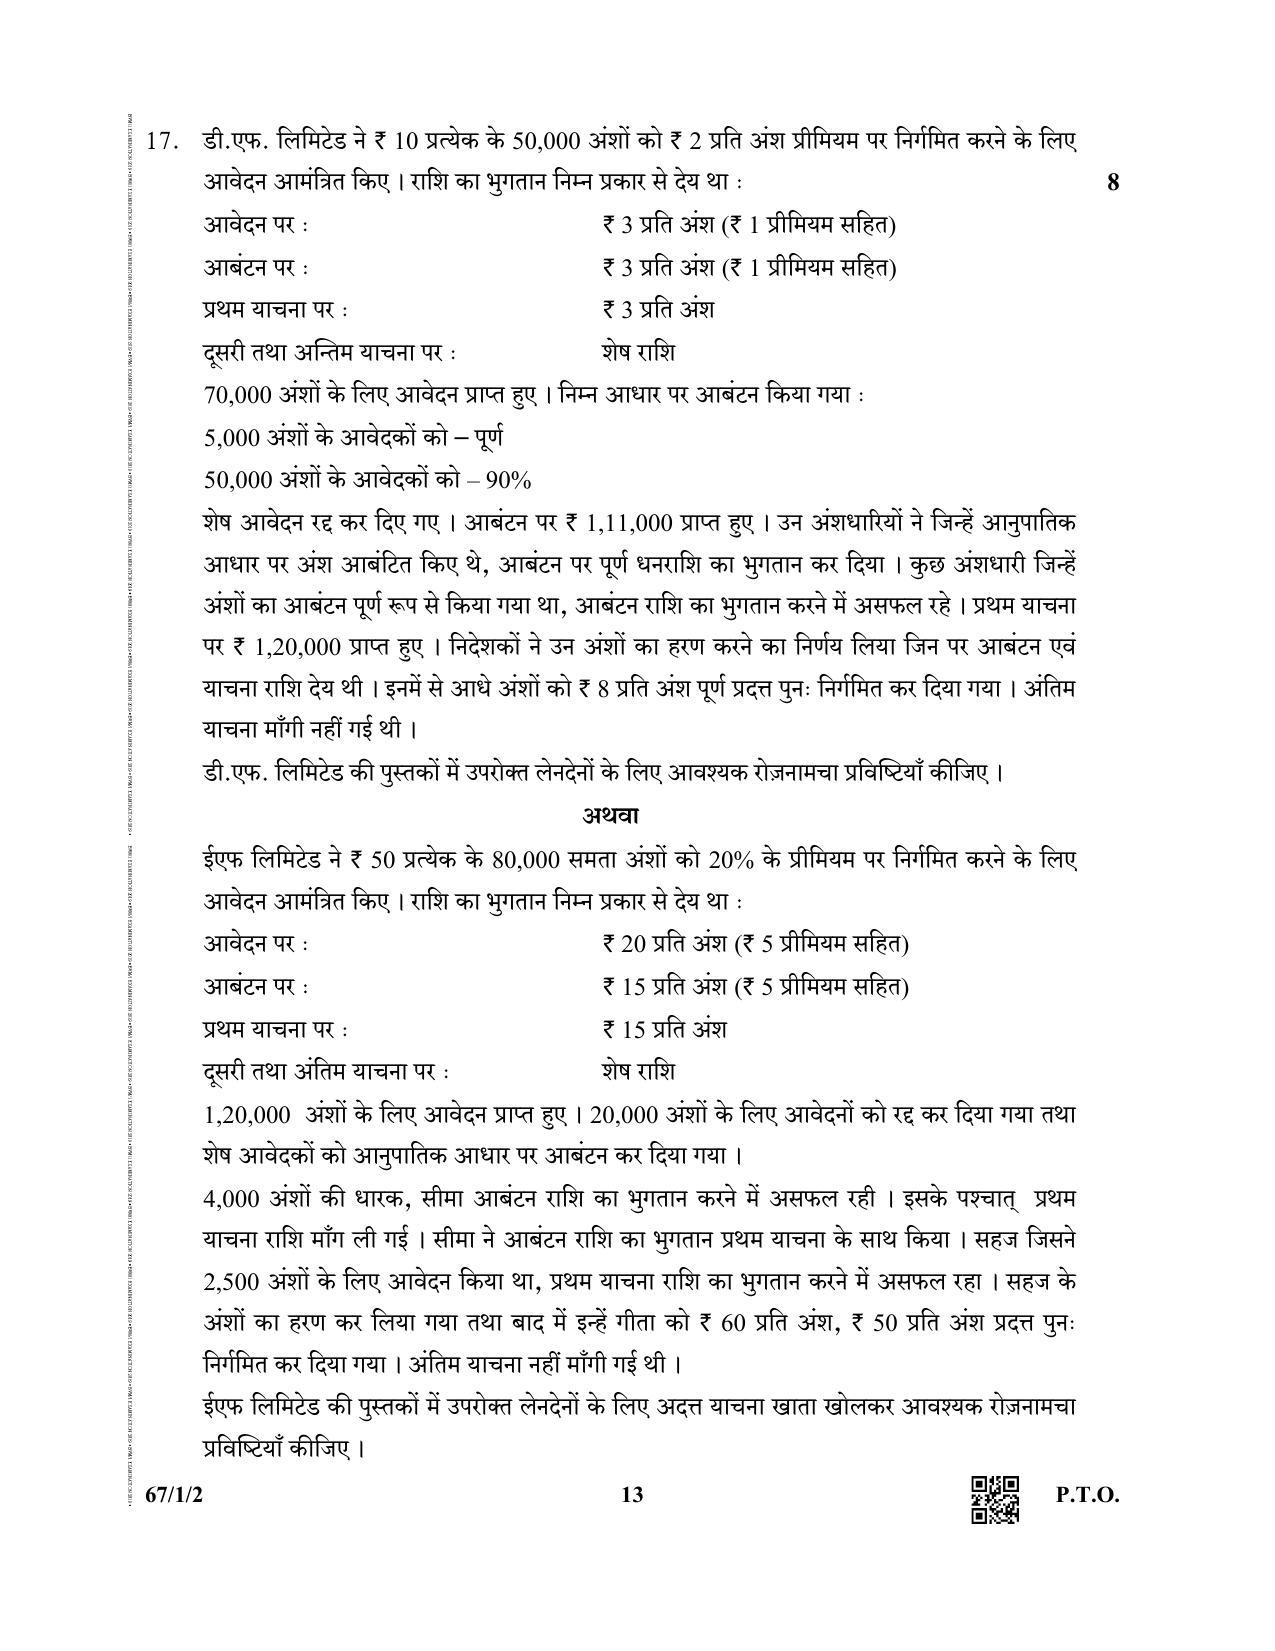 CBSE Class 12 67-1-2  (Accountancy) 2019 Question Paper - Page 13